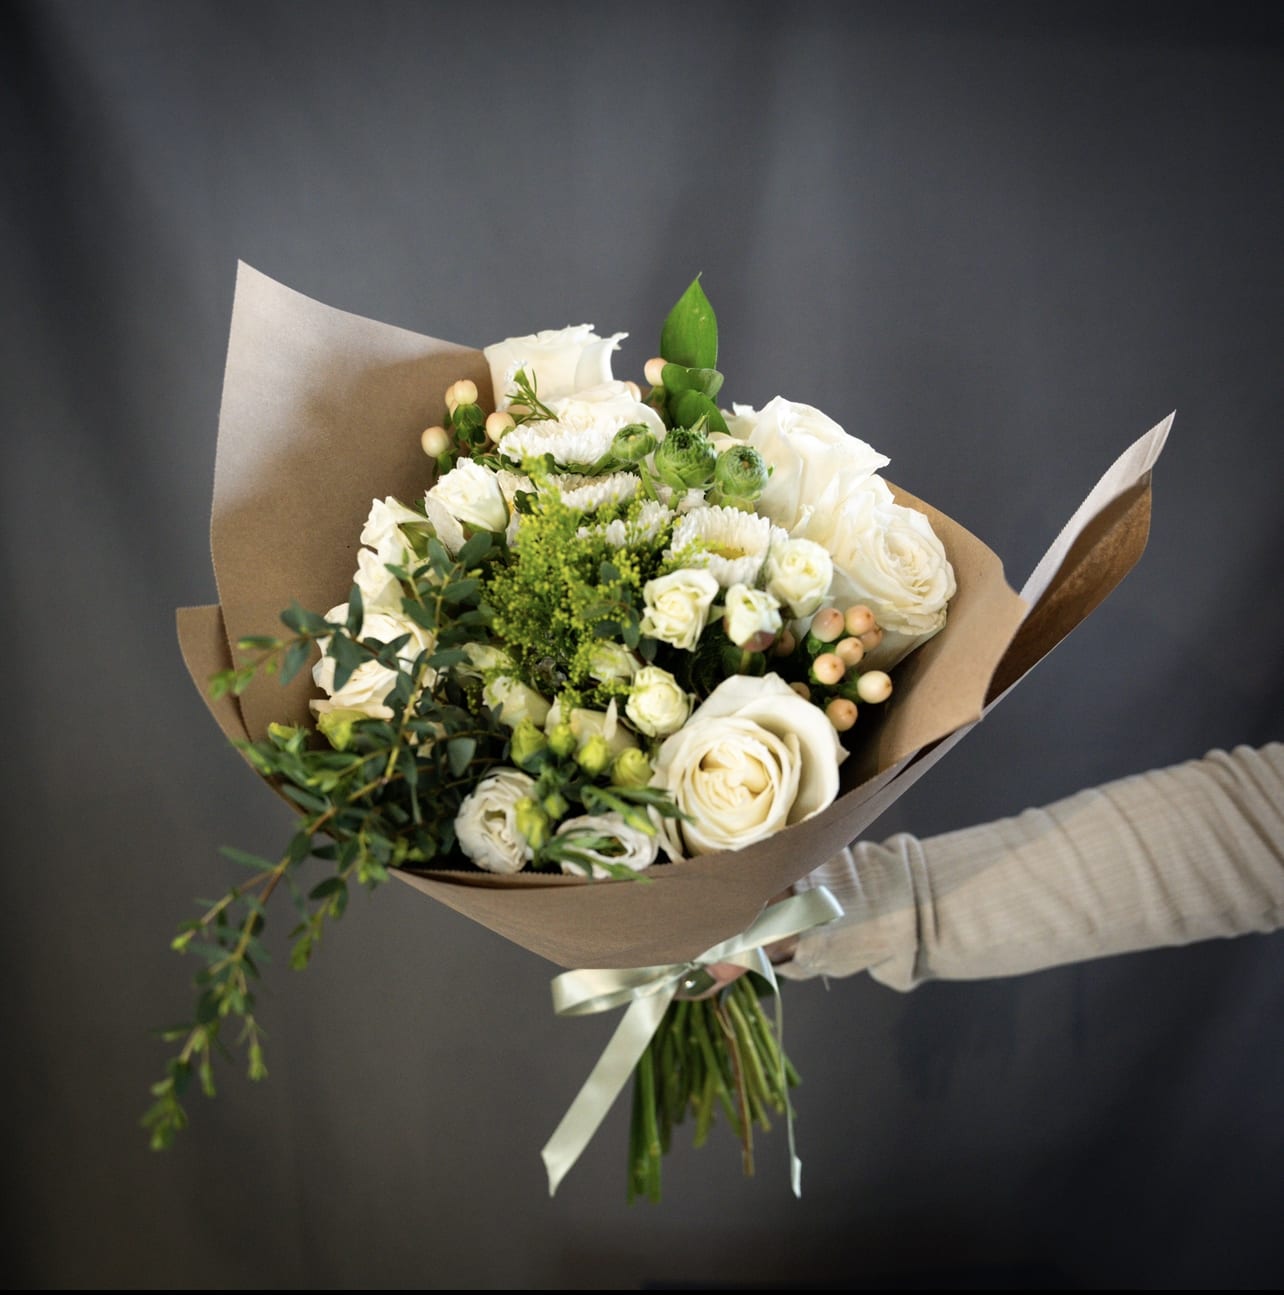 Bouquet Bianco  - Fresh and elegant hand-tied white bouquet wrapped in rustic butcher paper, featuring a stunning arrangement of white roses, delicate spray roses, and other fresh flowers. Perfect for weddings, anniversaries, or any special occasion. Our expertly crafted bouquet is sure to impress with its timeless beauty and natural charm. Order now for quick delivery!